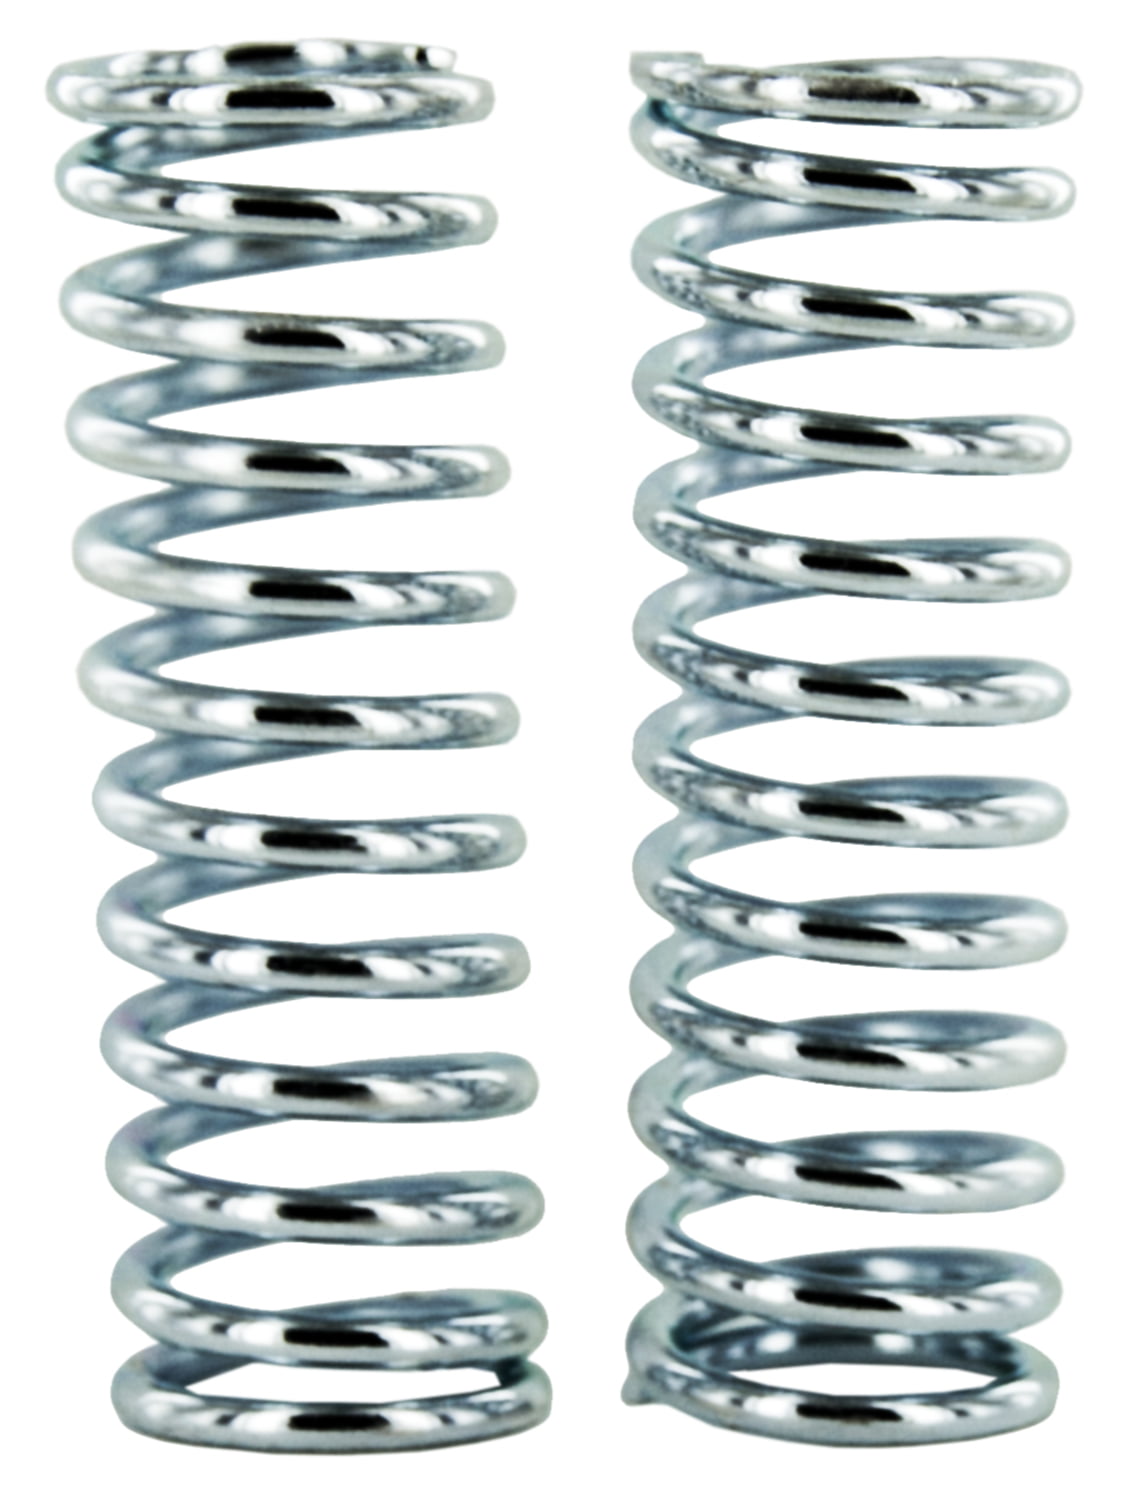 Century Spring C-832 2 Count Compression Springs 3" for sale online 